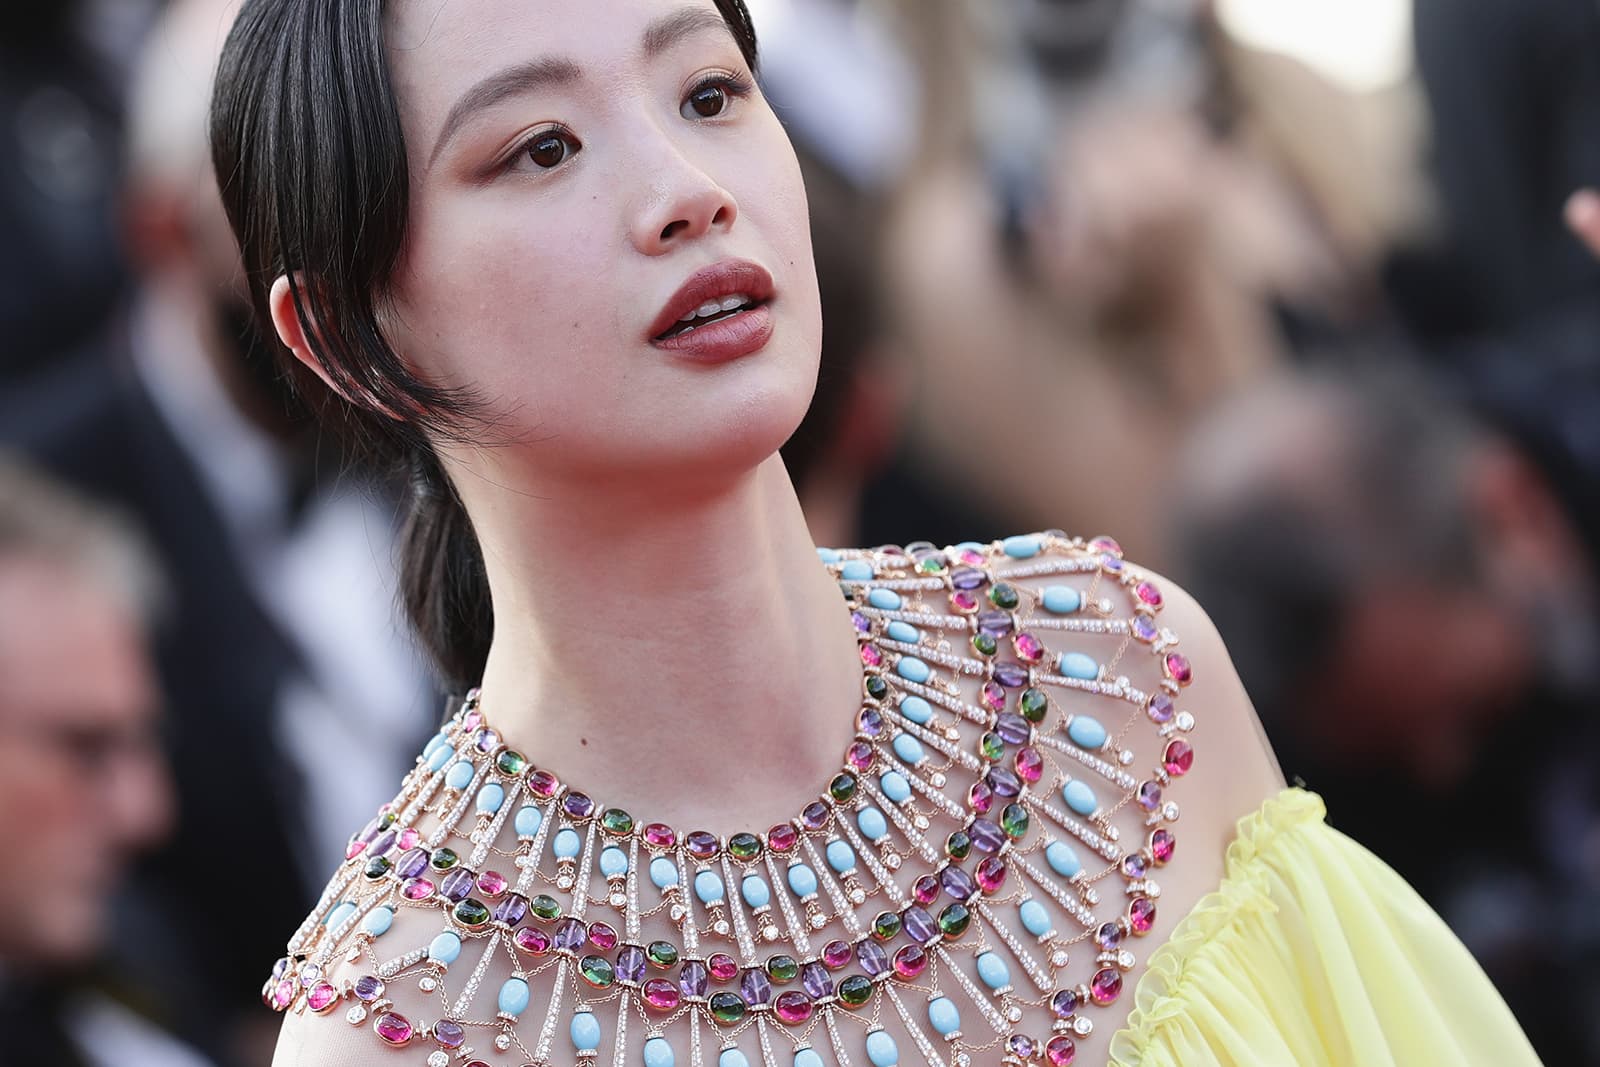 Chinese actress Li Meng at the Cannes Film Festival wearing a Bulgari High Jewellery poncho necklace with amethyst beads, cabochon rubellites, tourmalines, turquoise beads and round brilliant-cut diamonds 